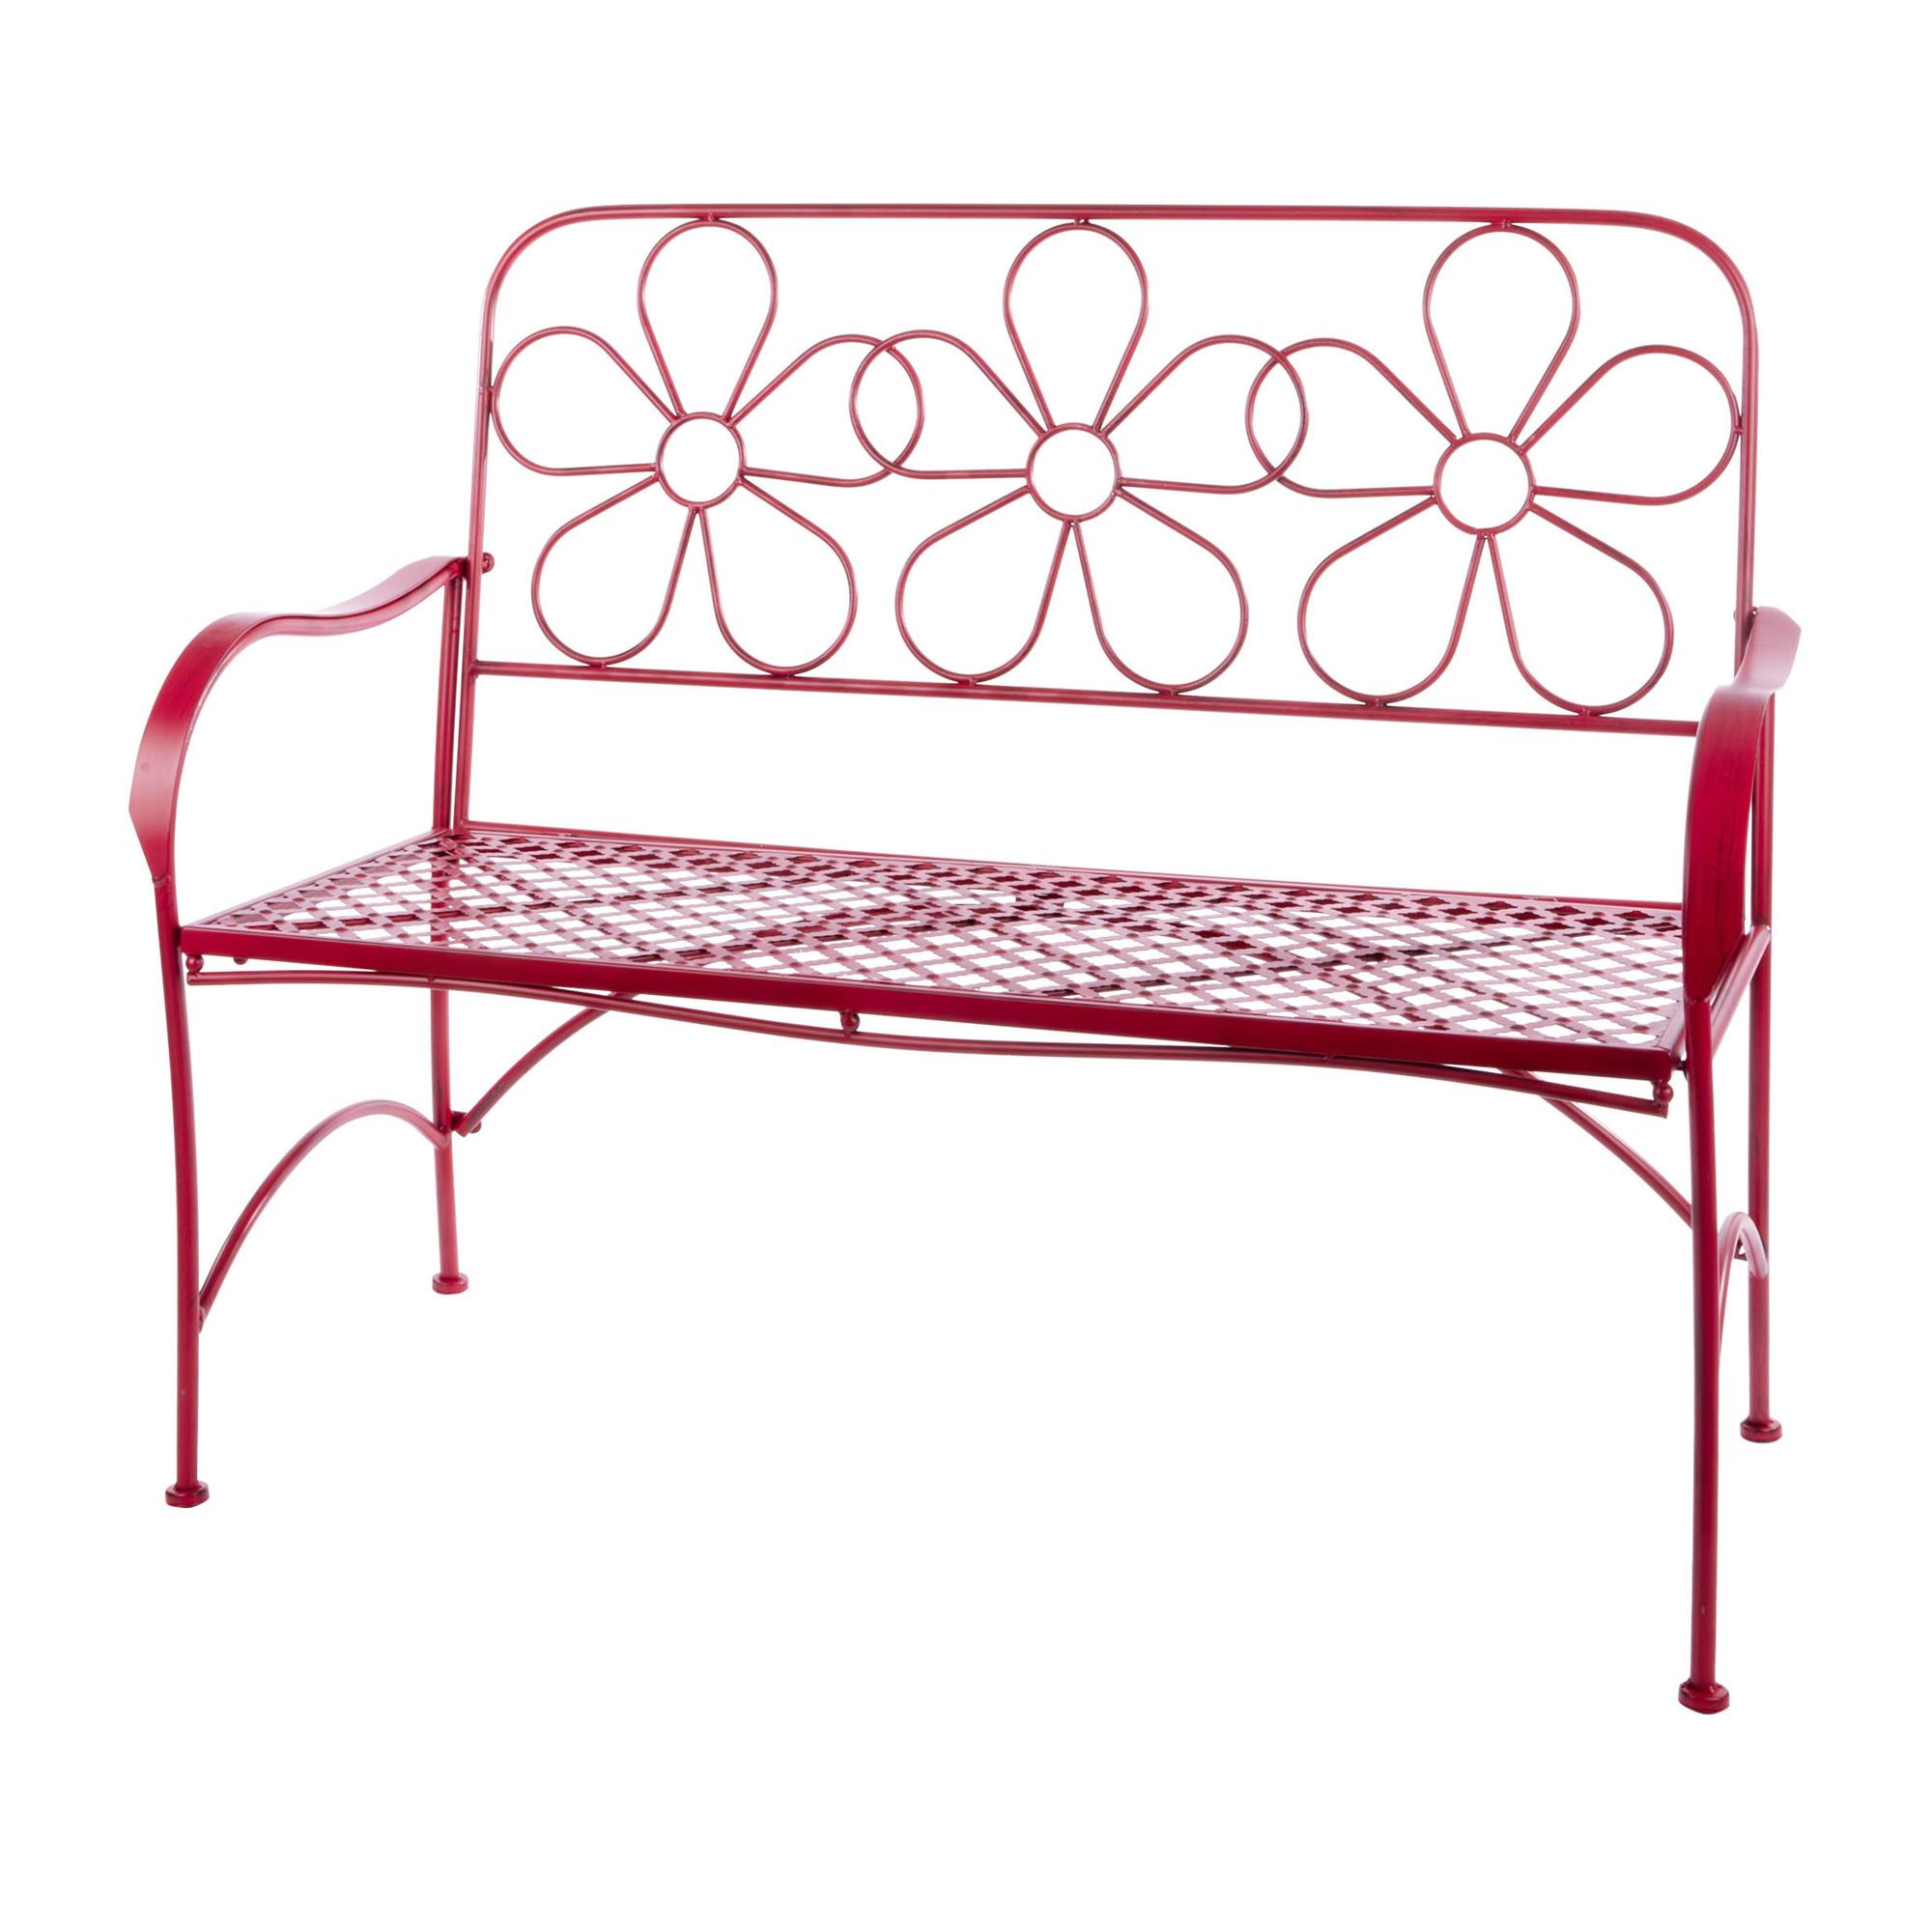 Alpine Corporation, Red Daisy Metal Bench, Primary Color Red, Material Multiple, Width 21 in, Model BAZ398RD